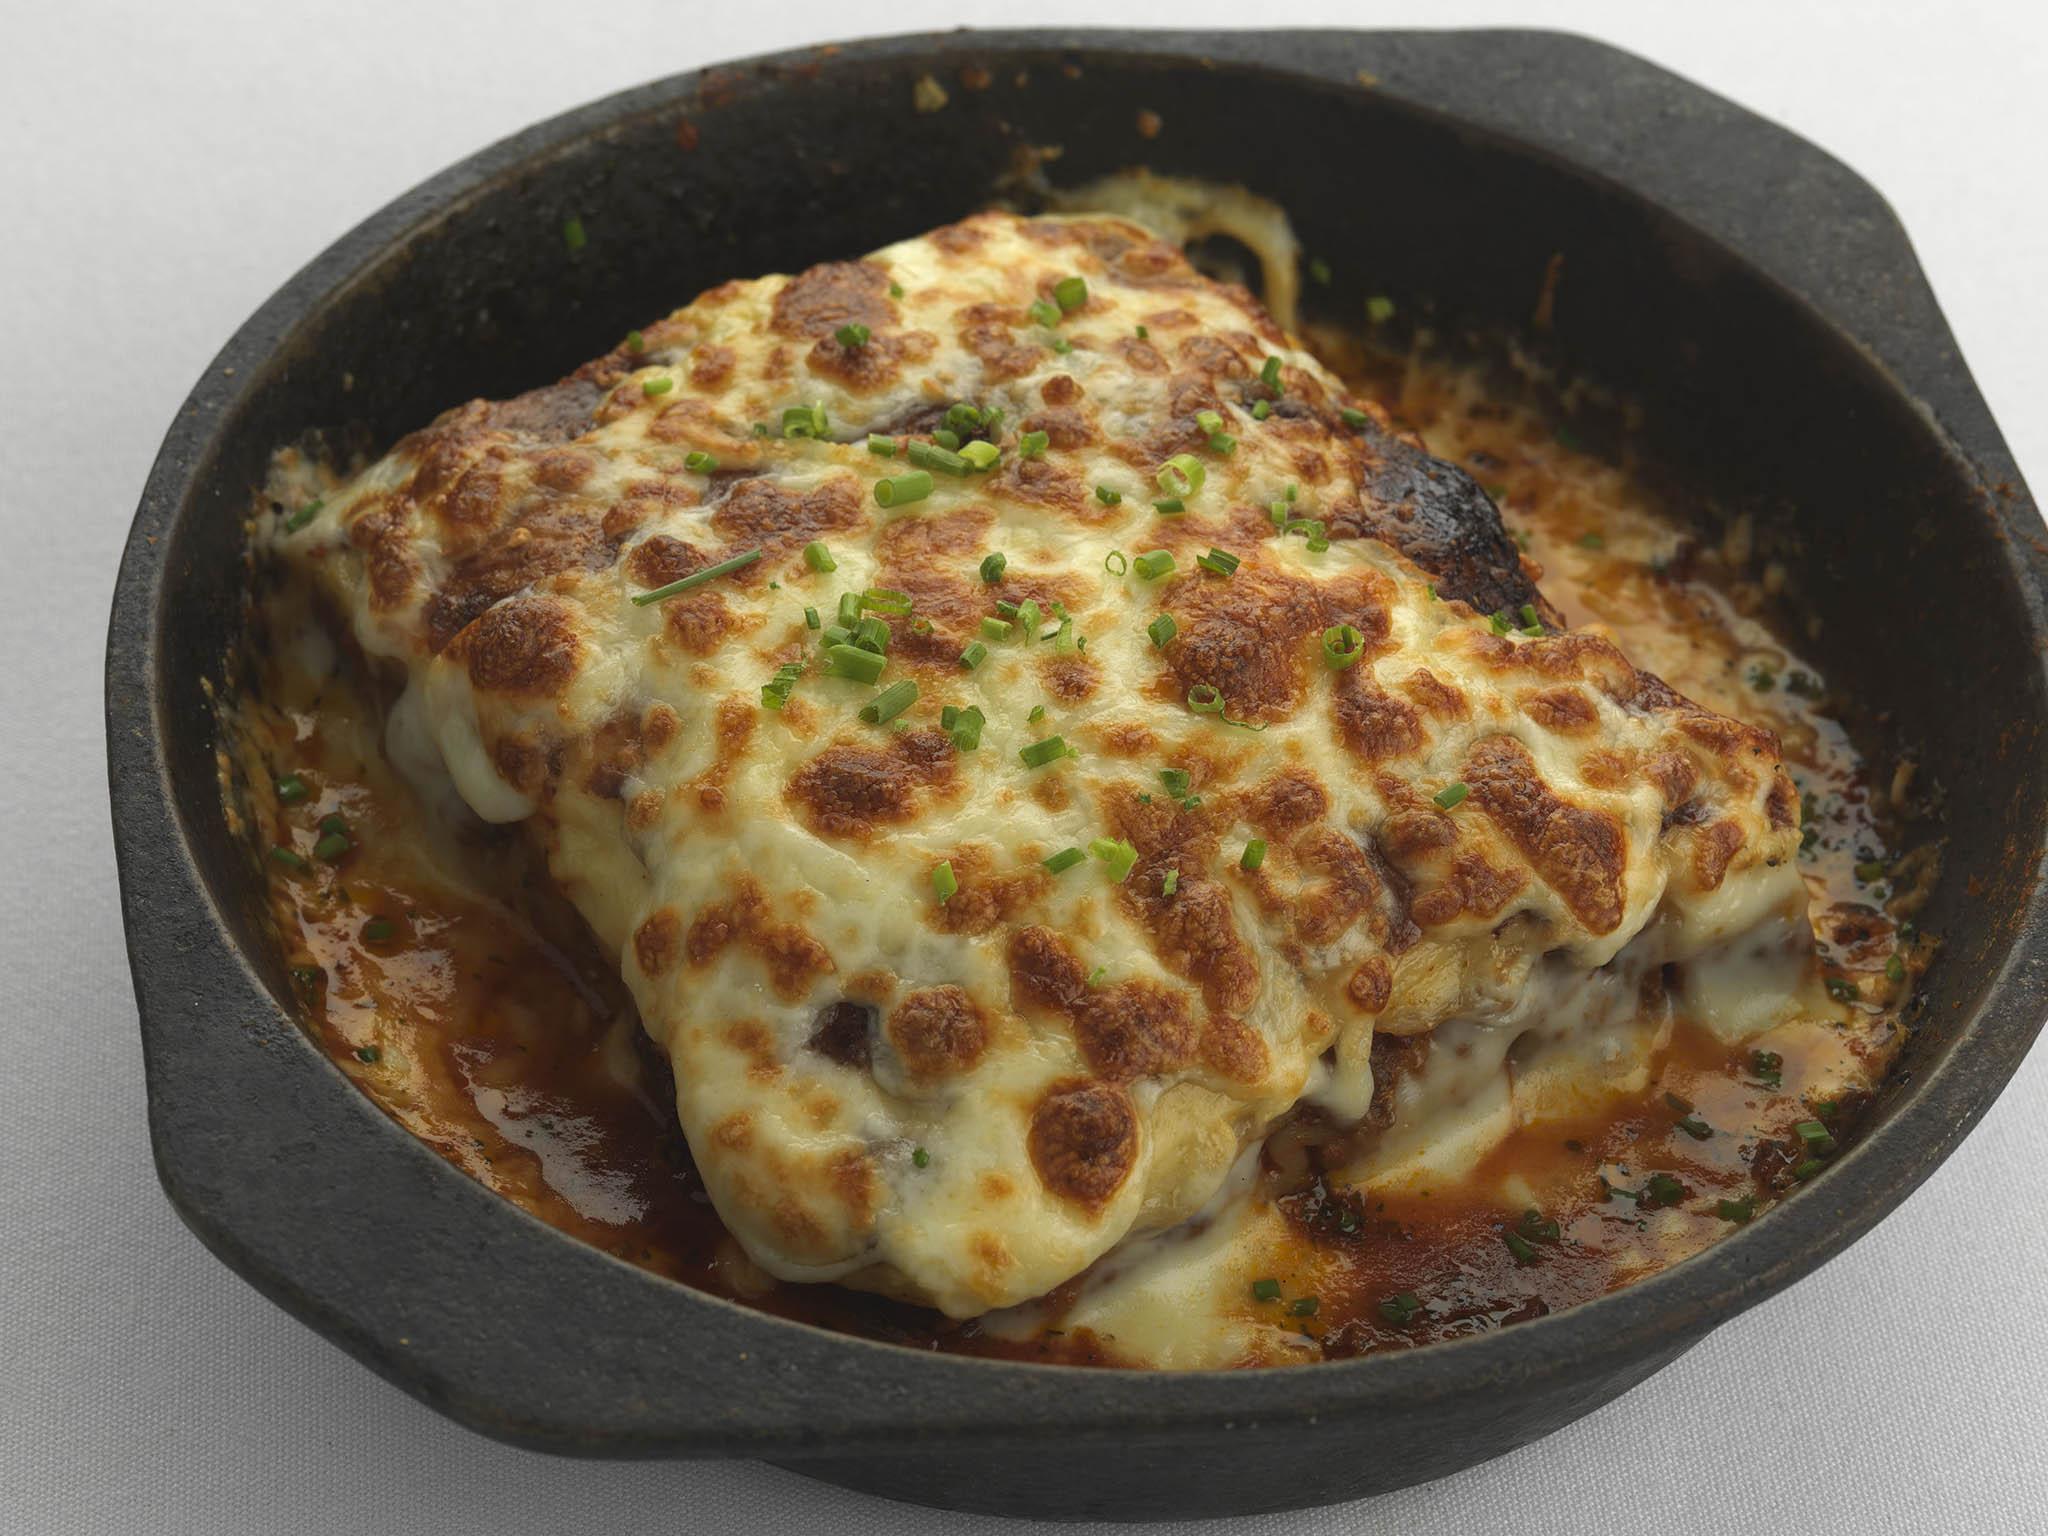 Combine a classic French sauce with an authentic Italian recipe for the perfect lasagne